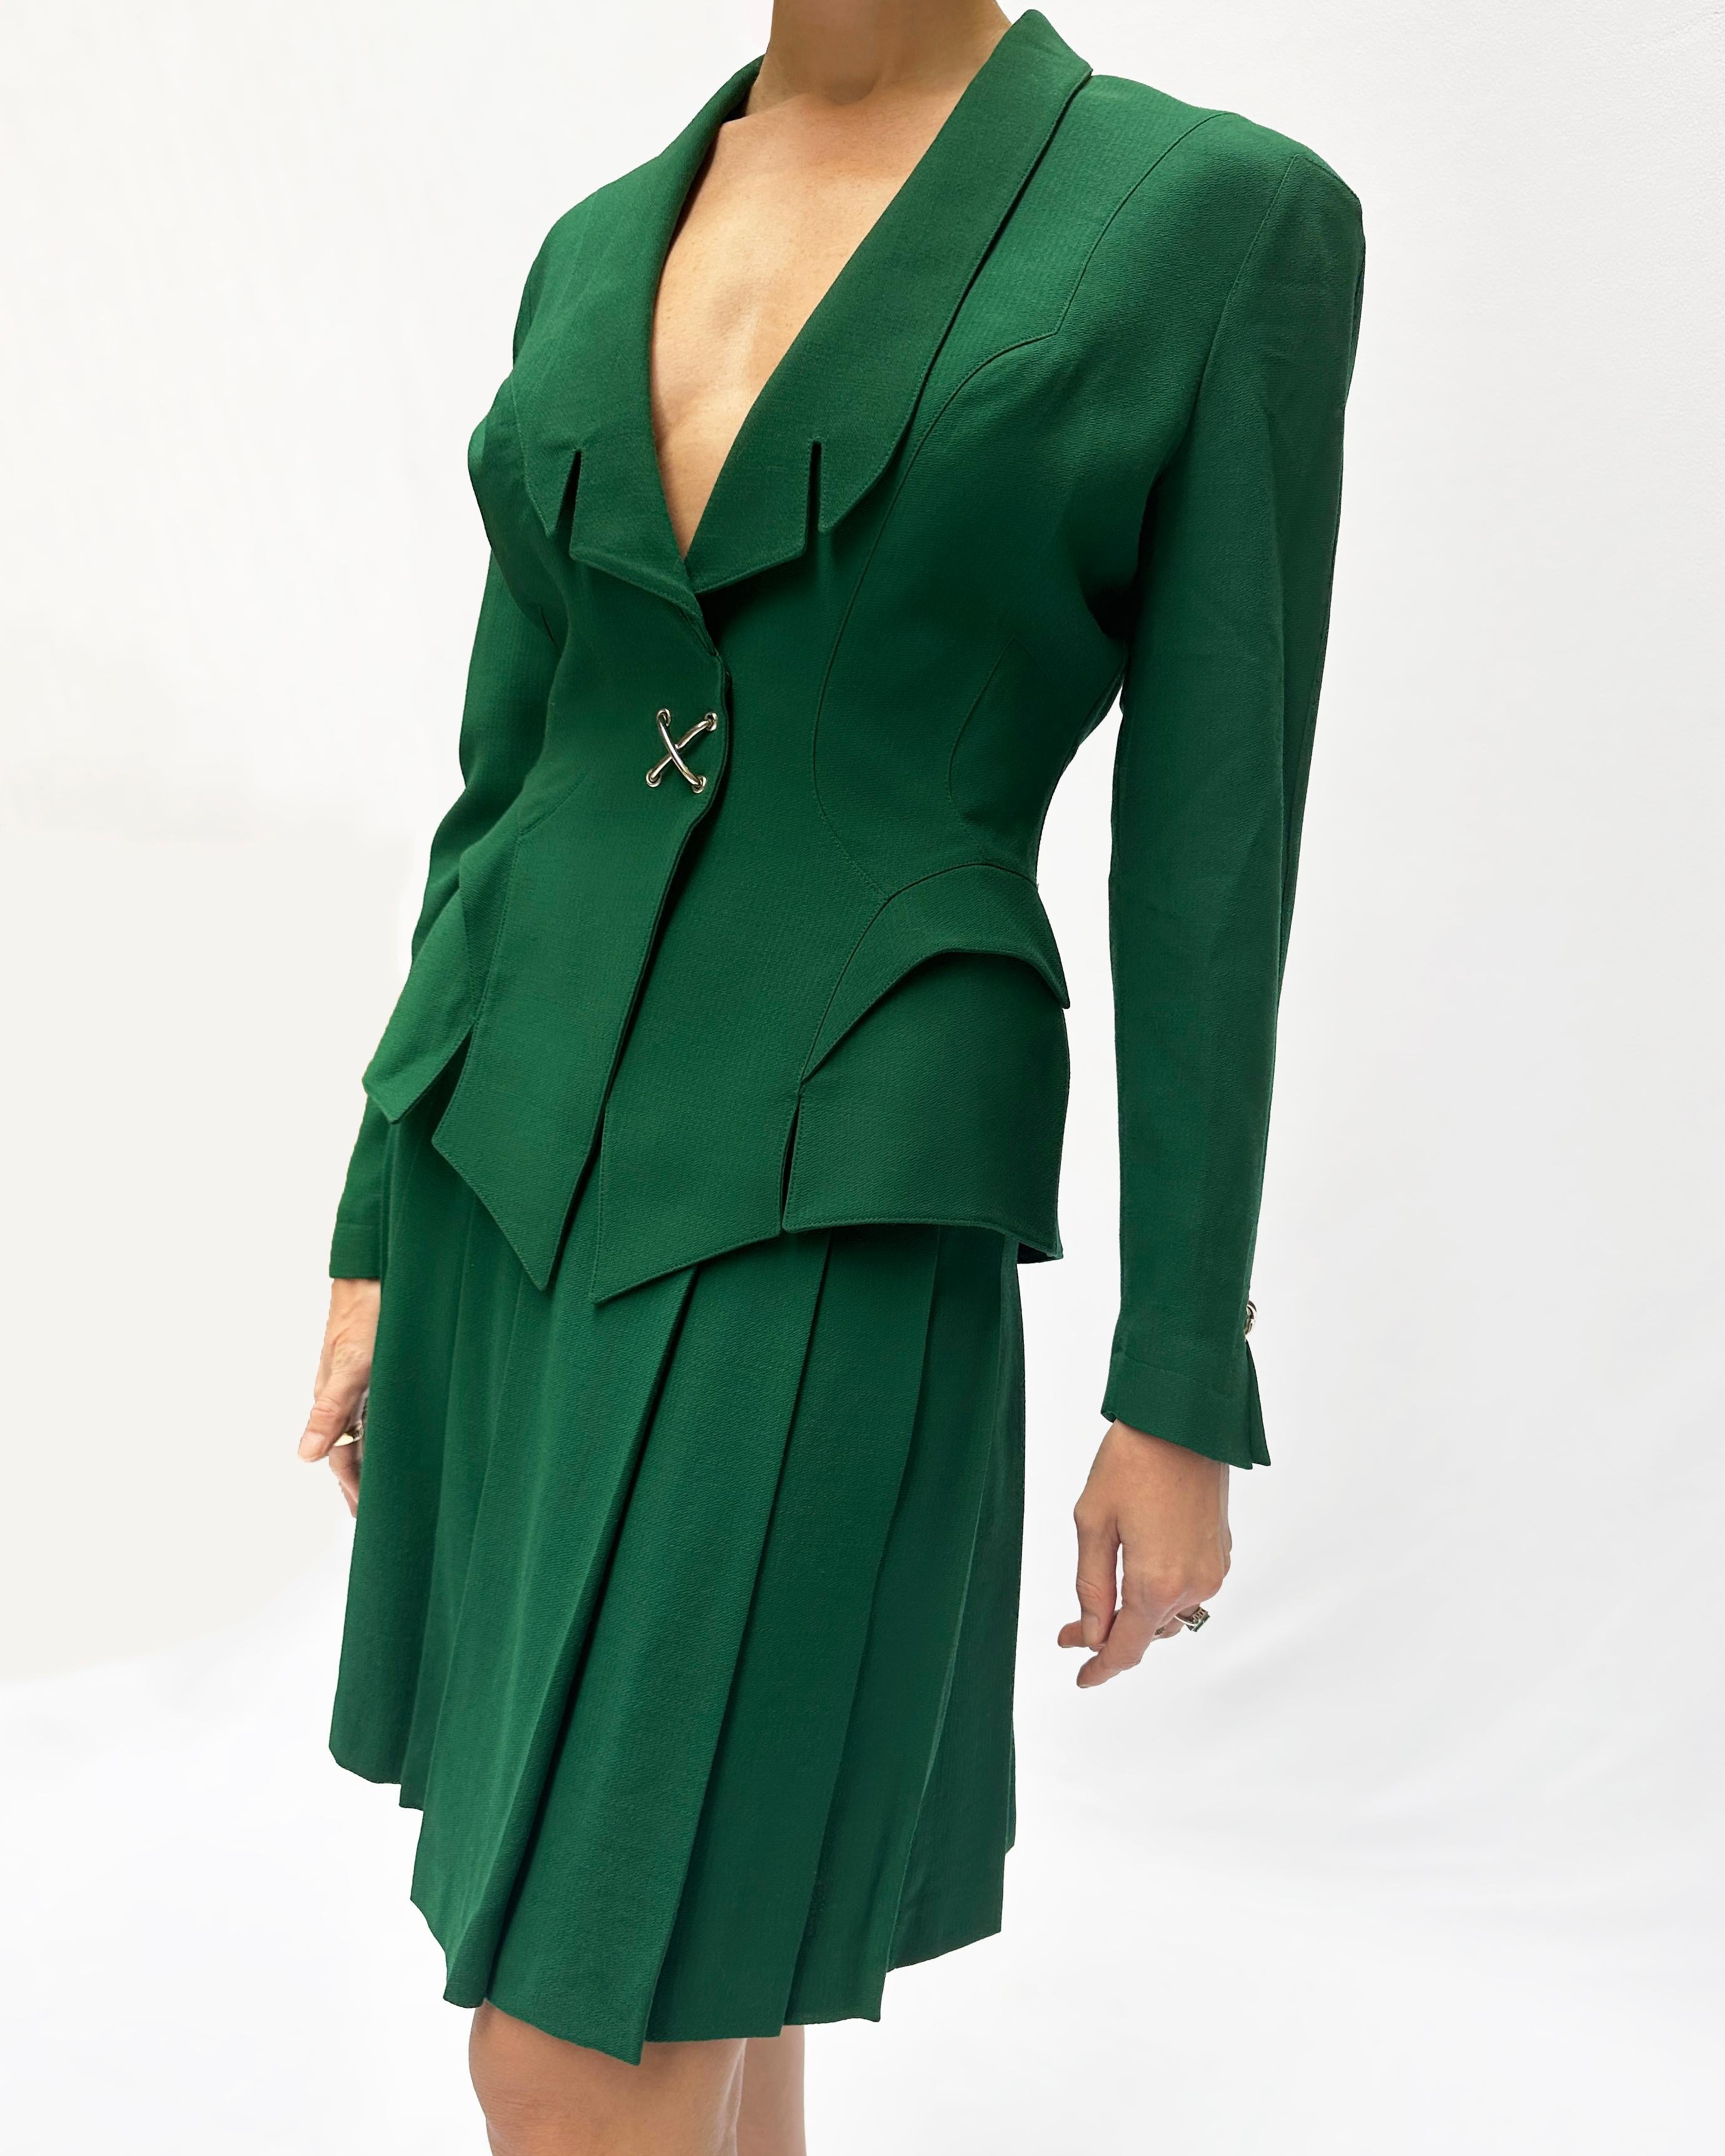 Vintage Thierry Mugler Fall 1992 Emerald Jacket + Pleated Skirt Suit For Sale 5